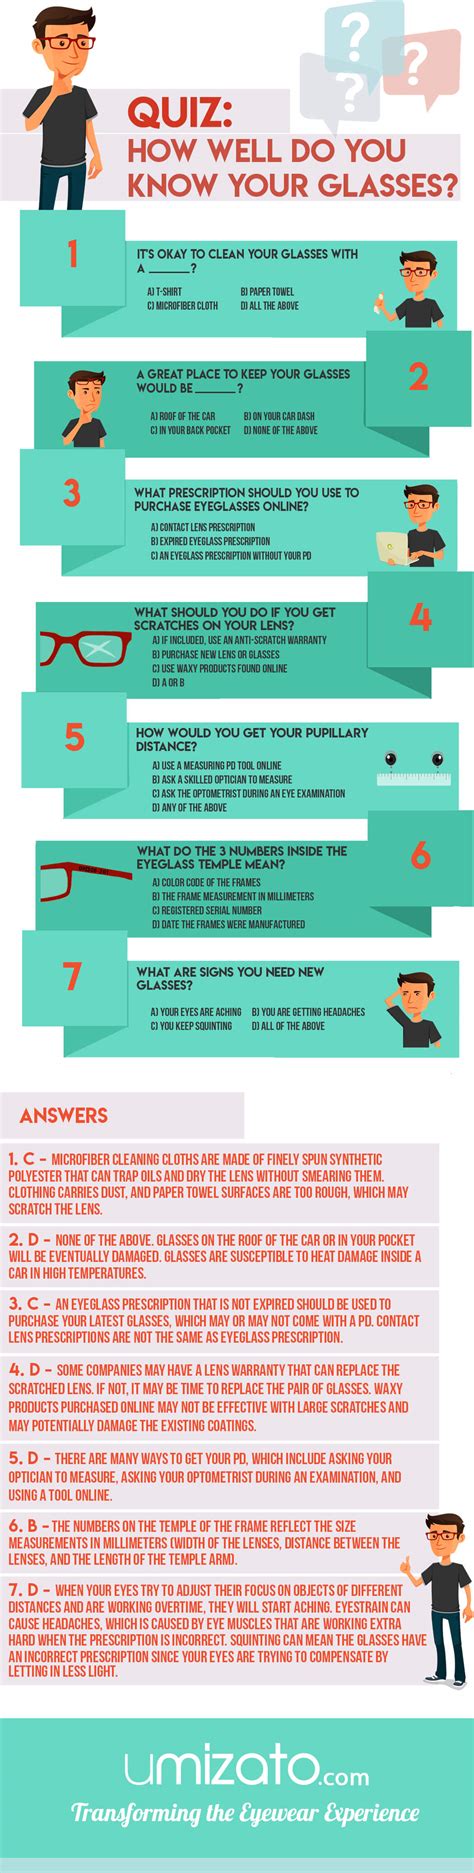 quiz how well do you know your glasses [infographic]